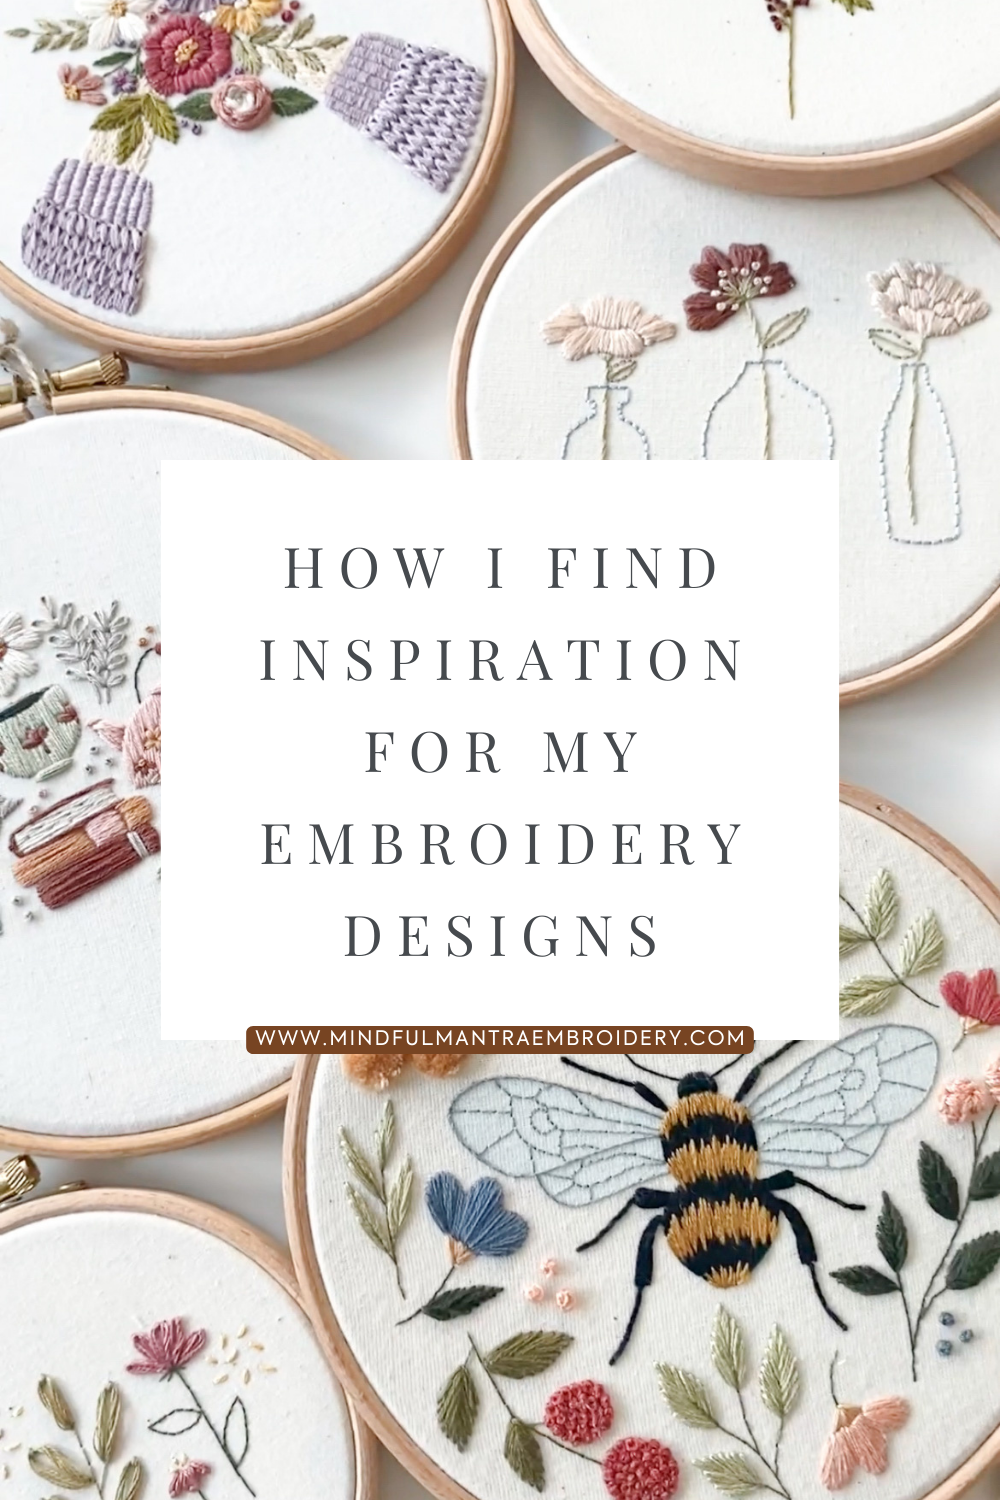 How I Find Inspiration for My Embroidery Designs